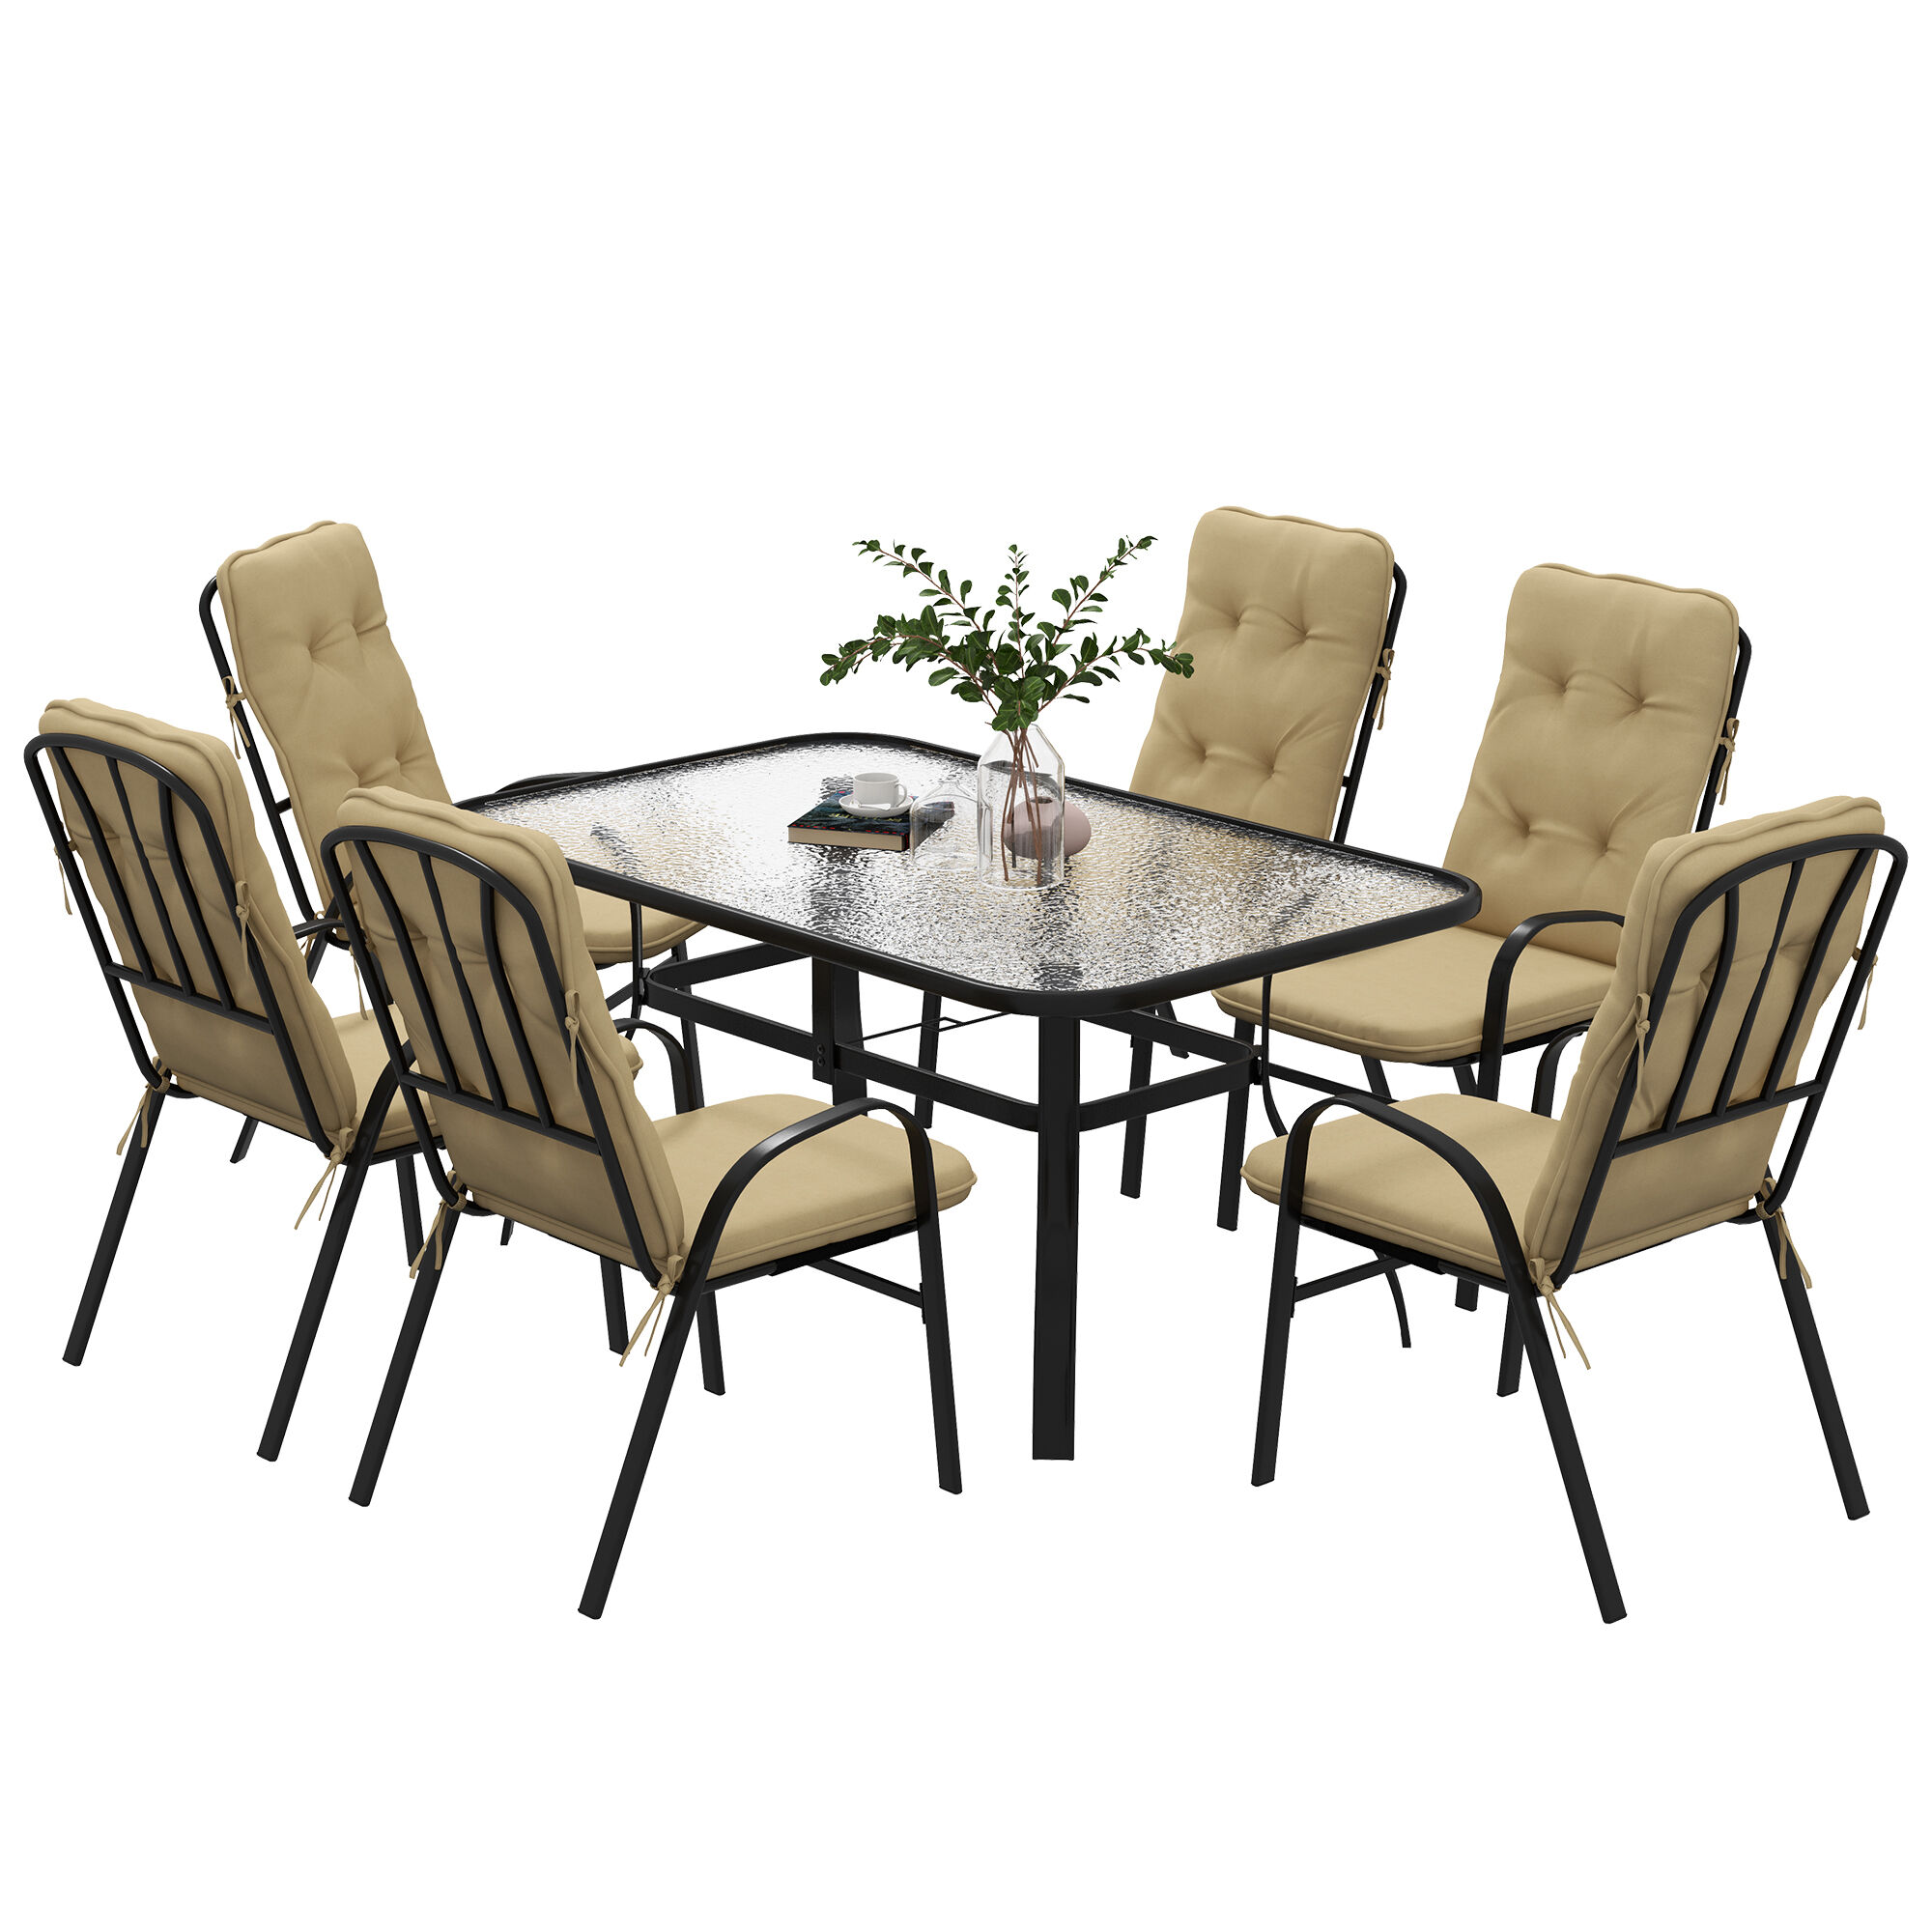 Outsunny 7 Piece Garden Dining Set, Outdoor Dining Table and 6 Cushioned Armchairs, Tempered Glass Top Table w/ Umbrella Hole, Texteline Seats, Beige